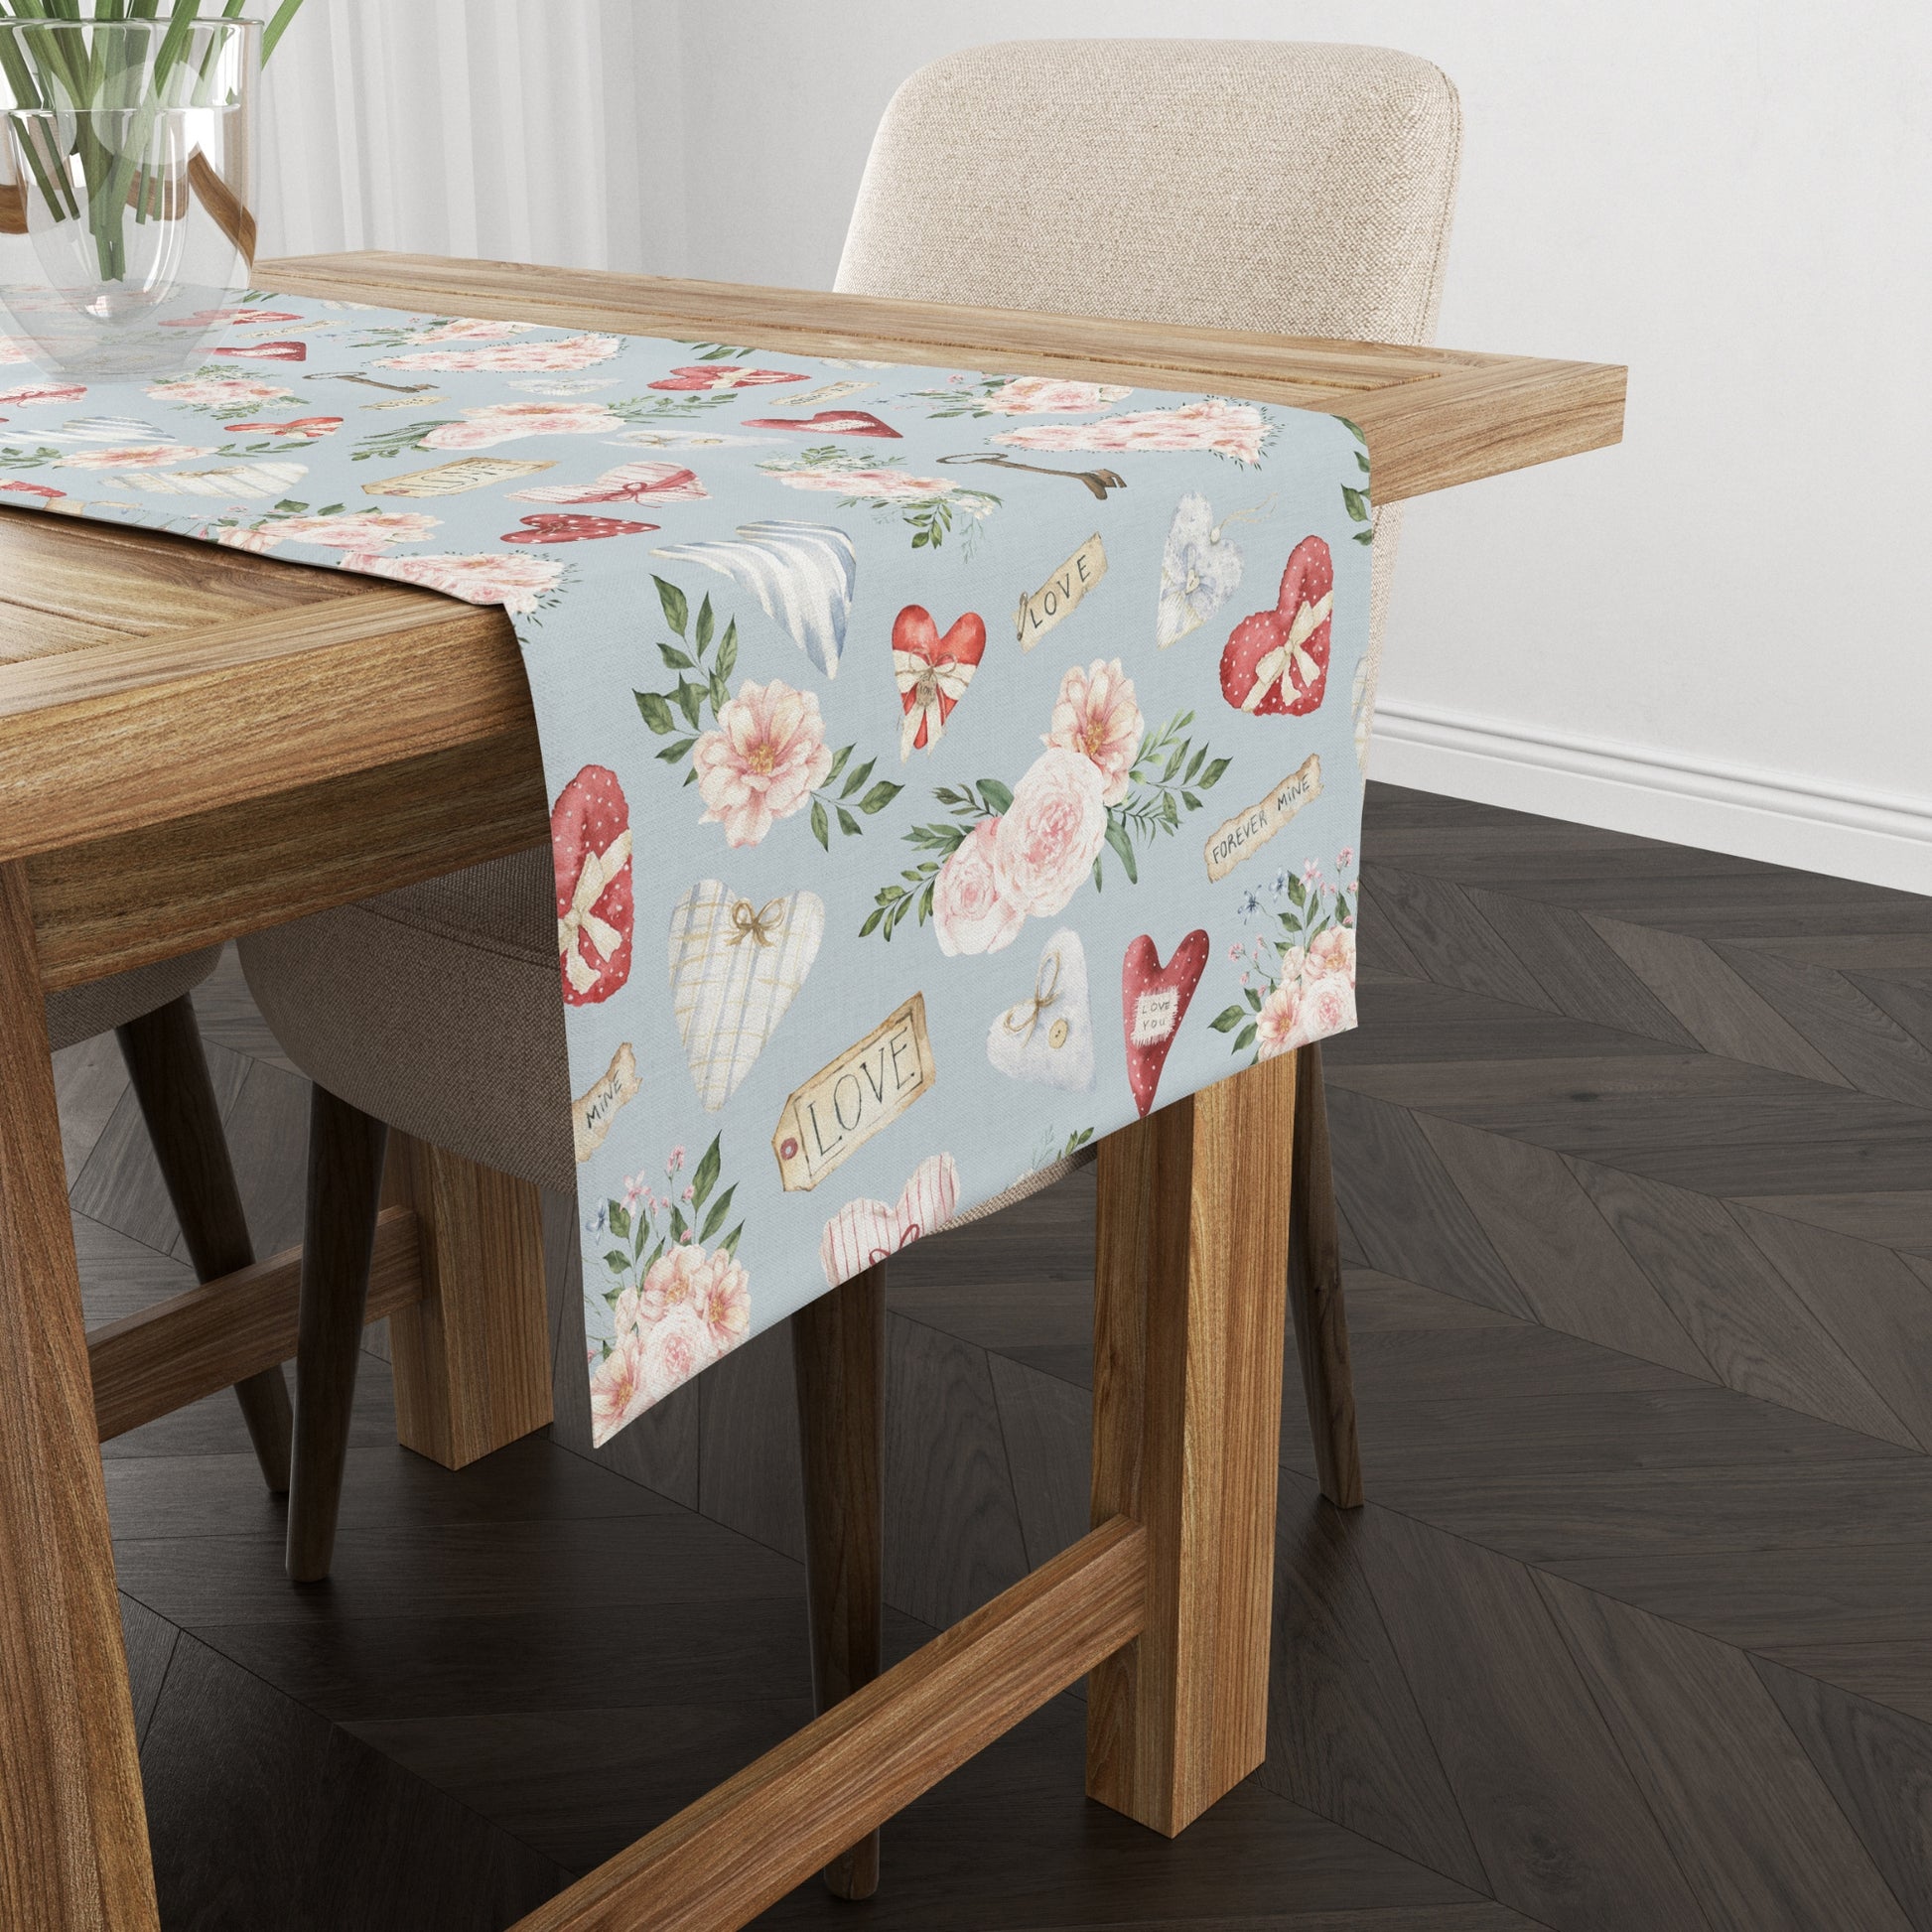 a table with a floral table runner on it